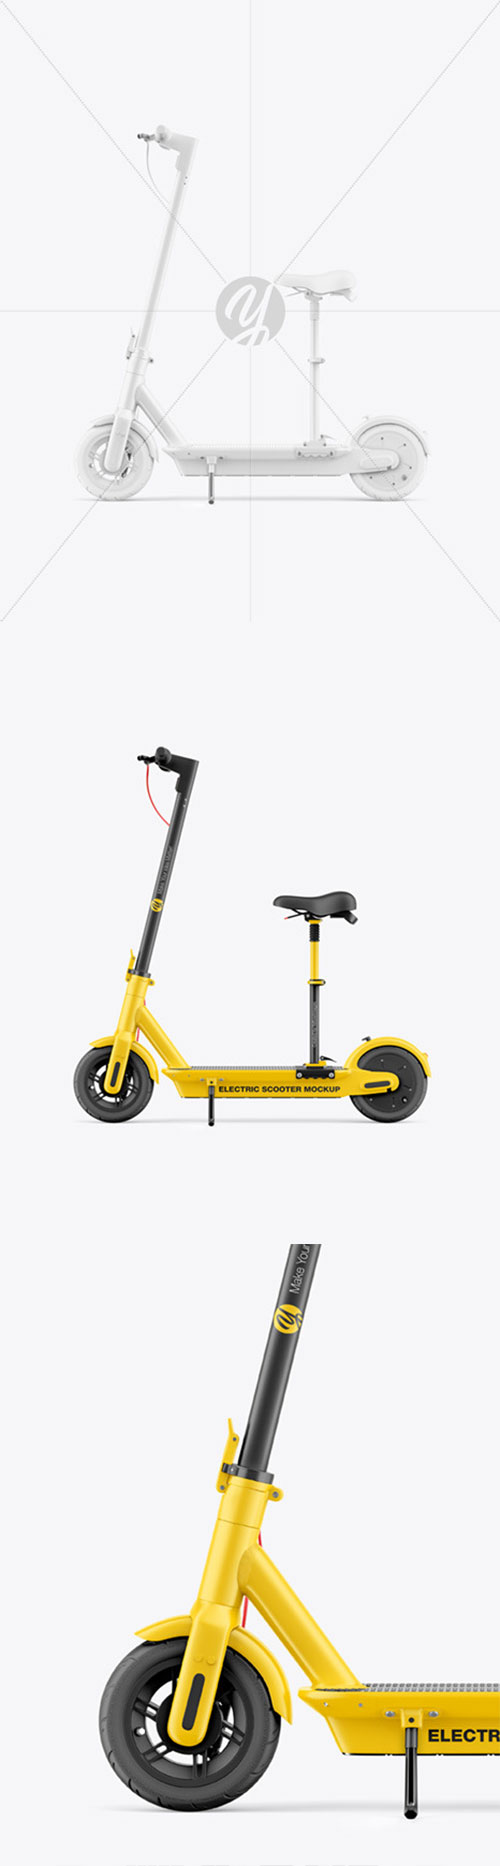 Electric Scooter Mockup with Seat - Side View 86461